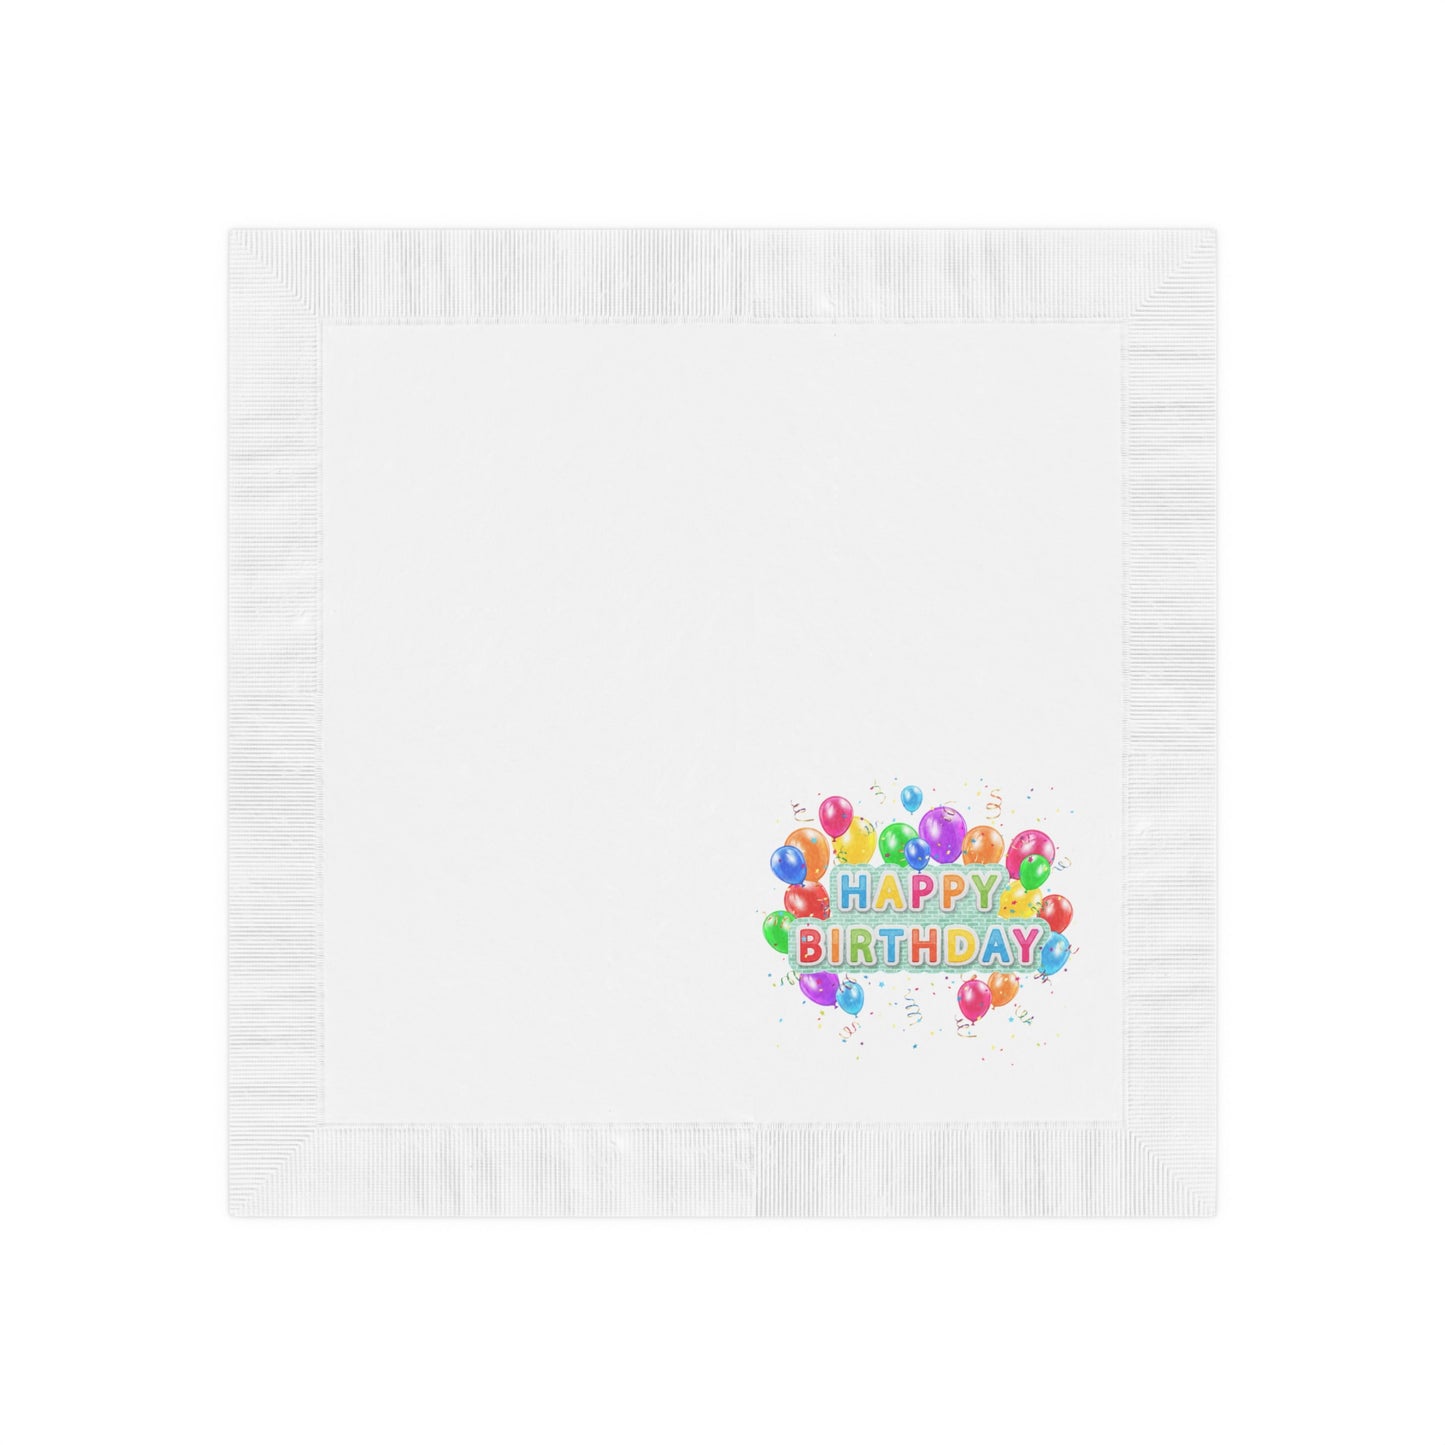 "Happy Birthday" White Coined Napkins, Available in 2 sizes (Luncheon 6.5" x 6.5") and Beverage (4.8" x 4.8")